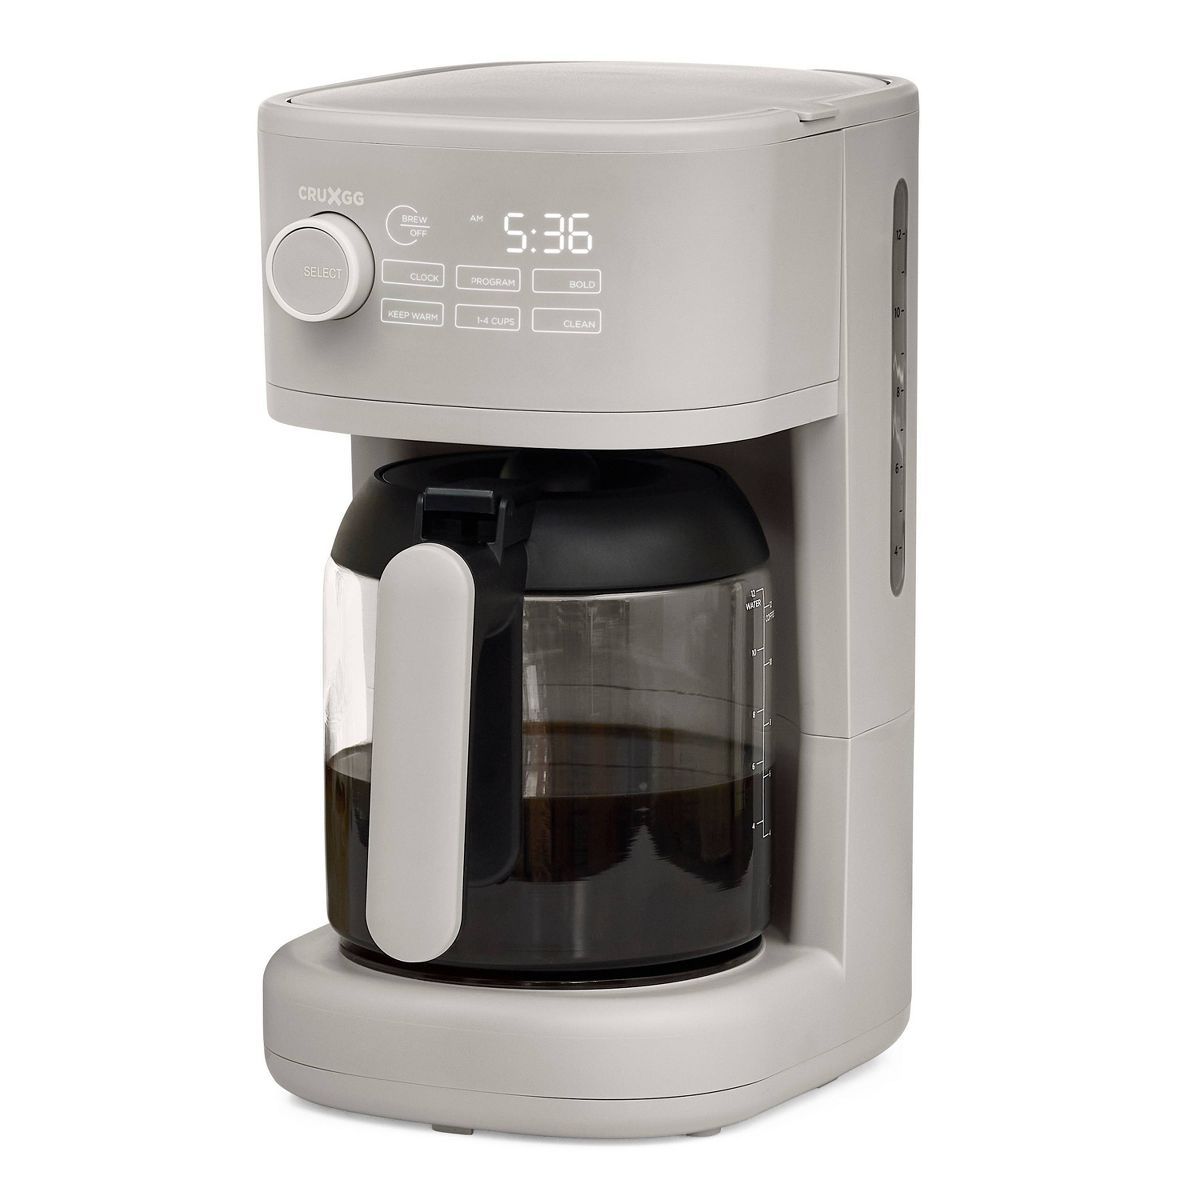 CRUXGG 12 Cup Programmable Coffee Maker | Target